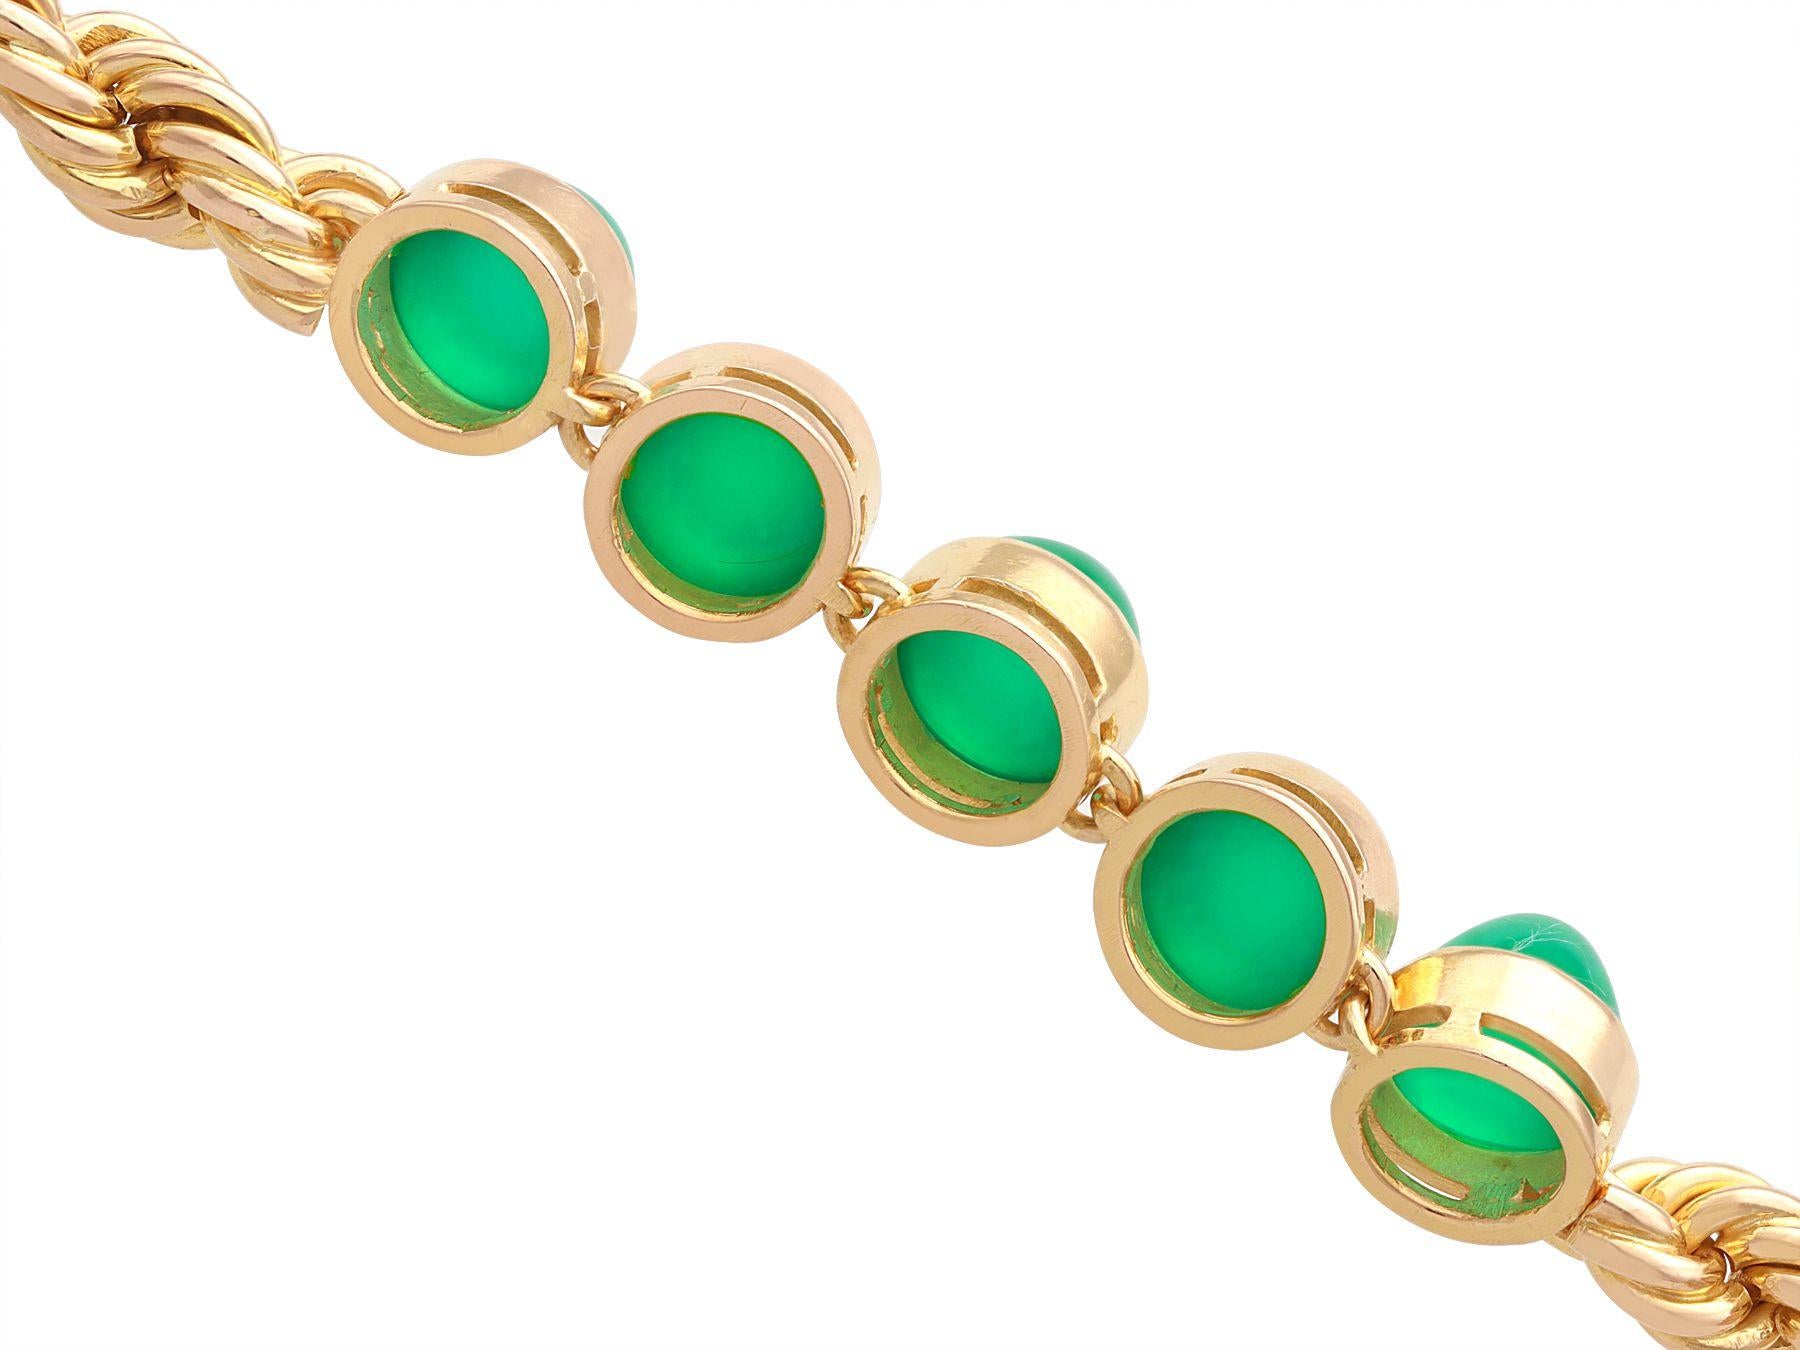 Vintage Egyptian 9.25 Carat Chrysoprase Yellow Gold Bracelet In Excellent Condition For Sale In Jesmond, Newcastle Upon Tyne